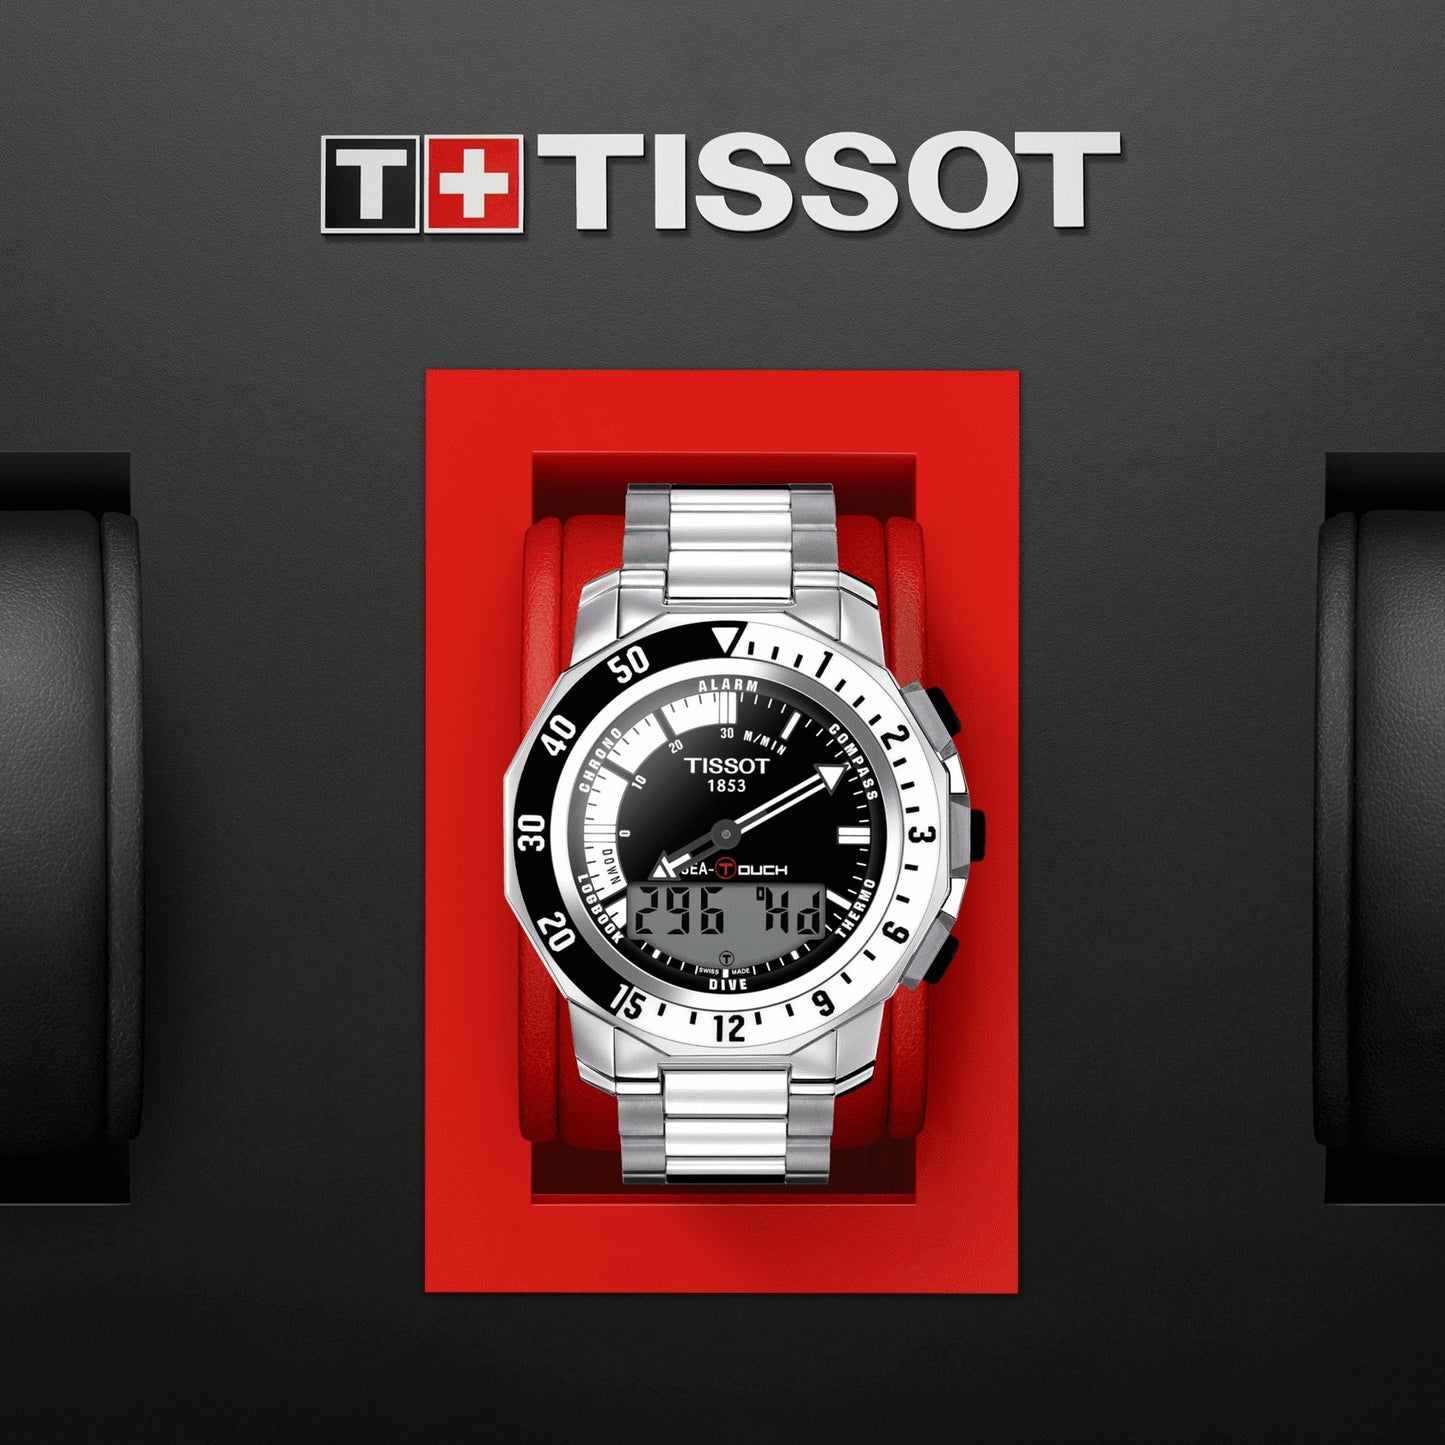 Tissot Sea-Touch In Meters